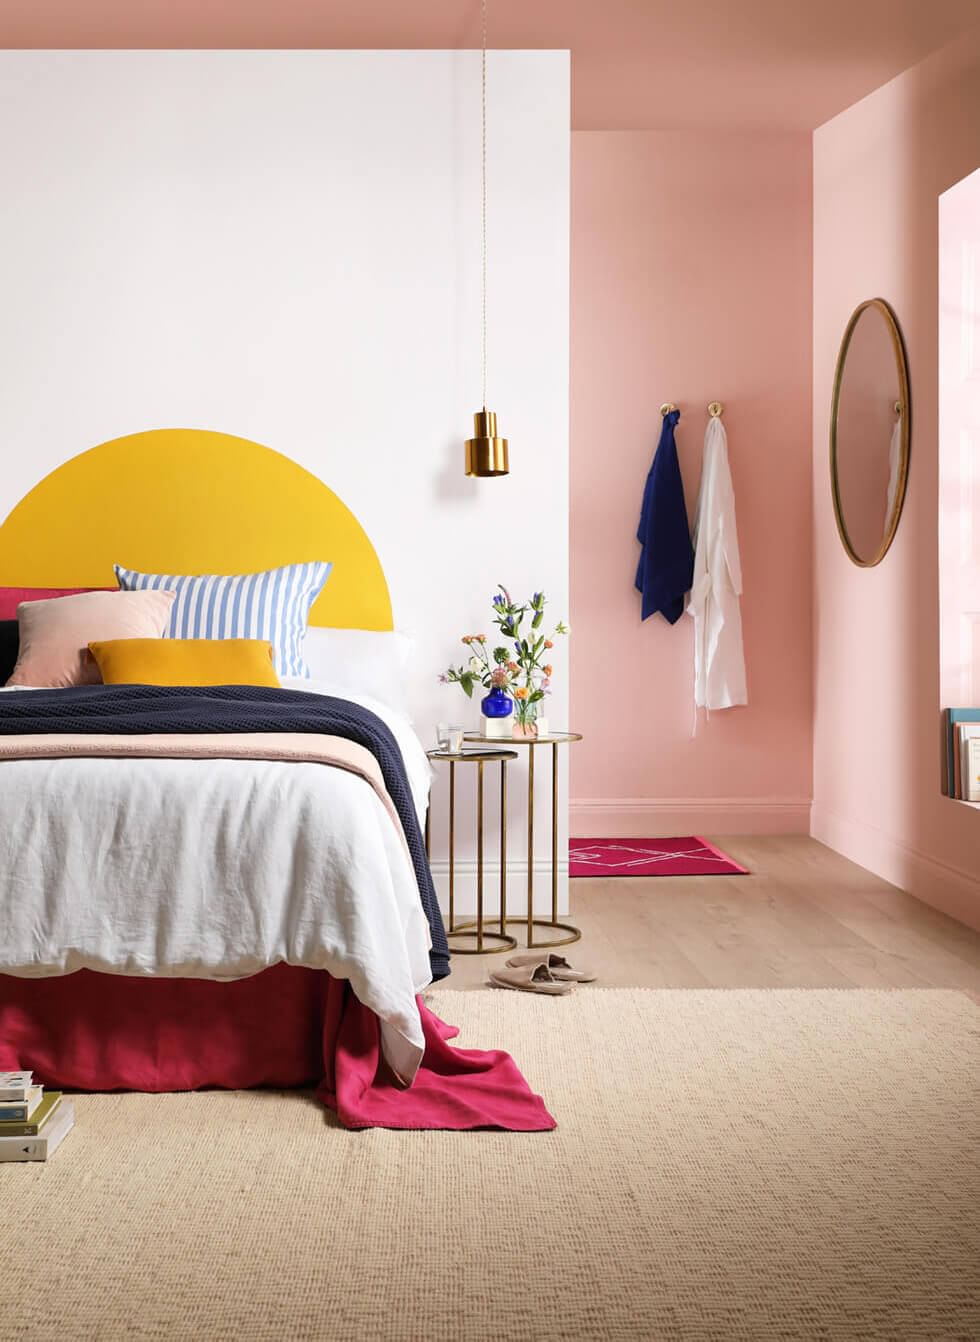 Bedroom with yellow arch and pastel pink walls